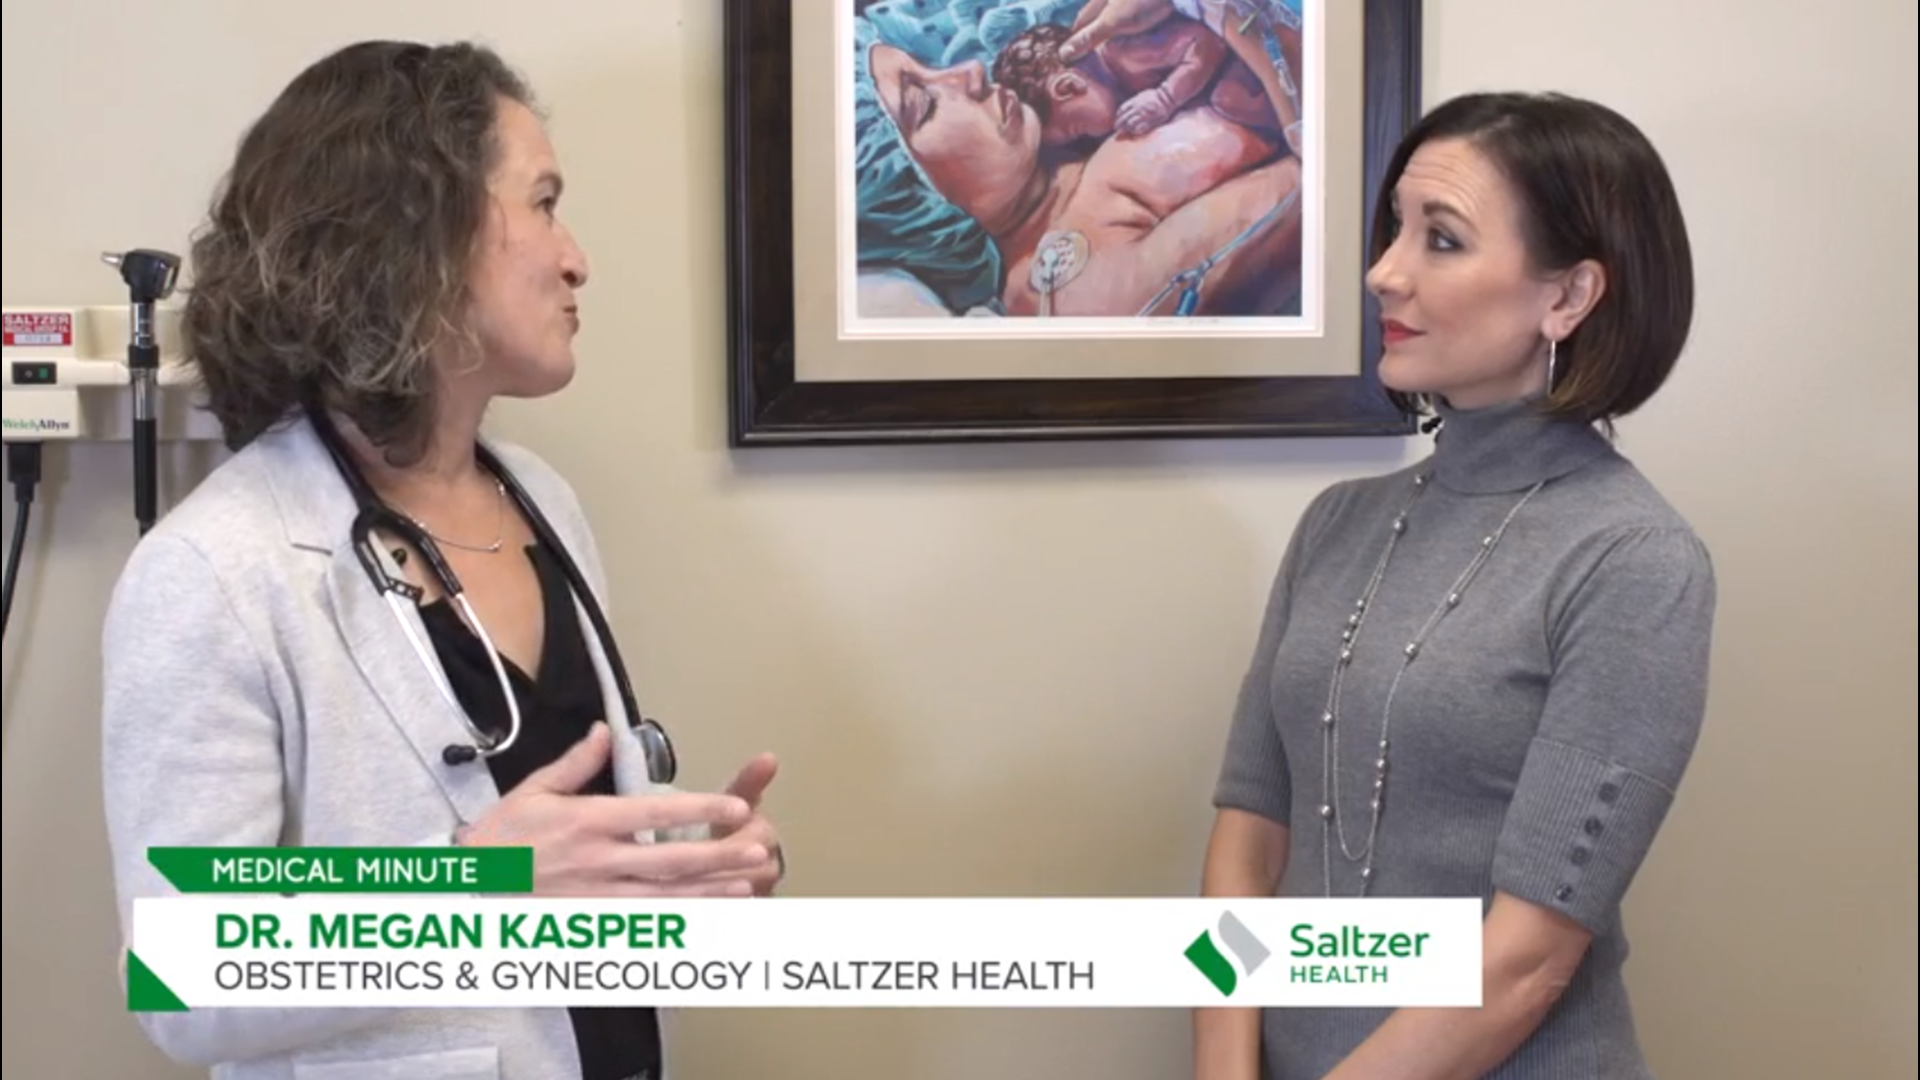 Women's health issues can easily be overlooked, Dr. Kasper, OBGYN at Saltzer Health, makes Women's wellness a priority